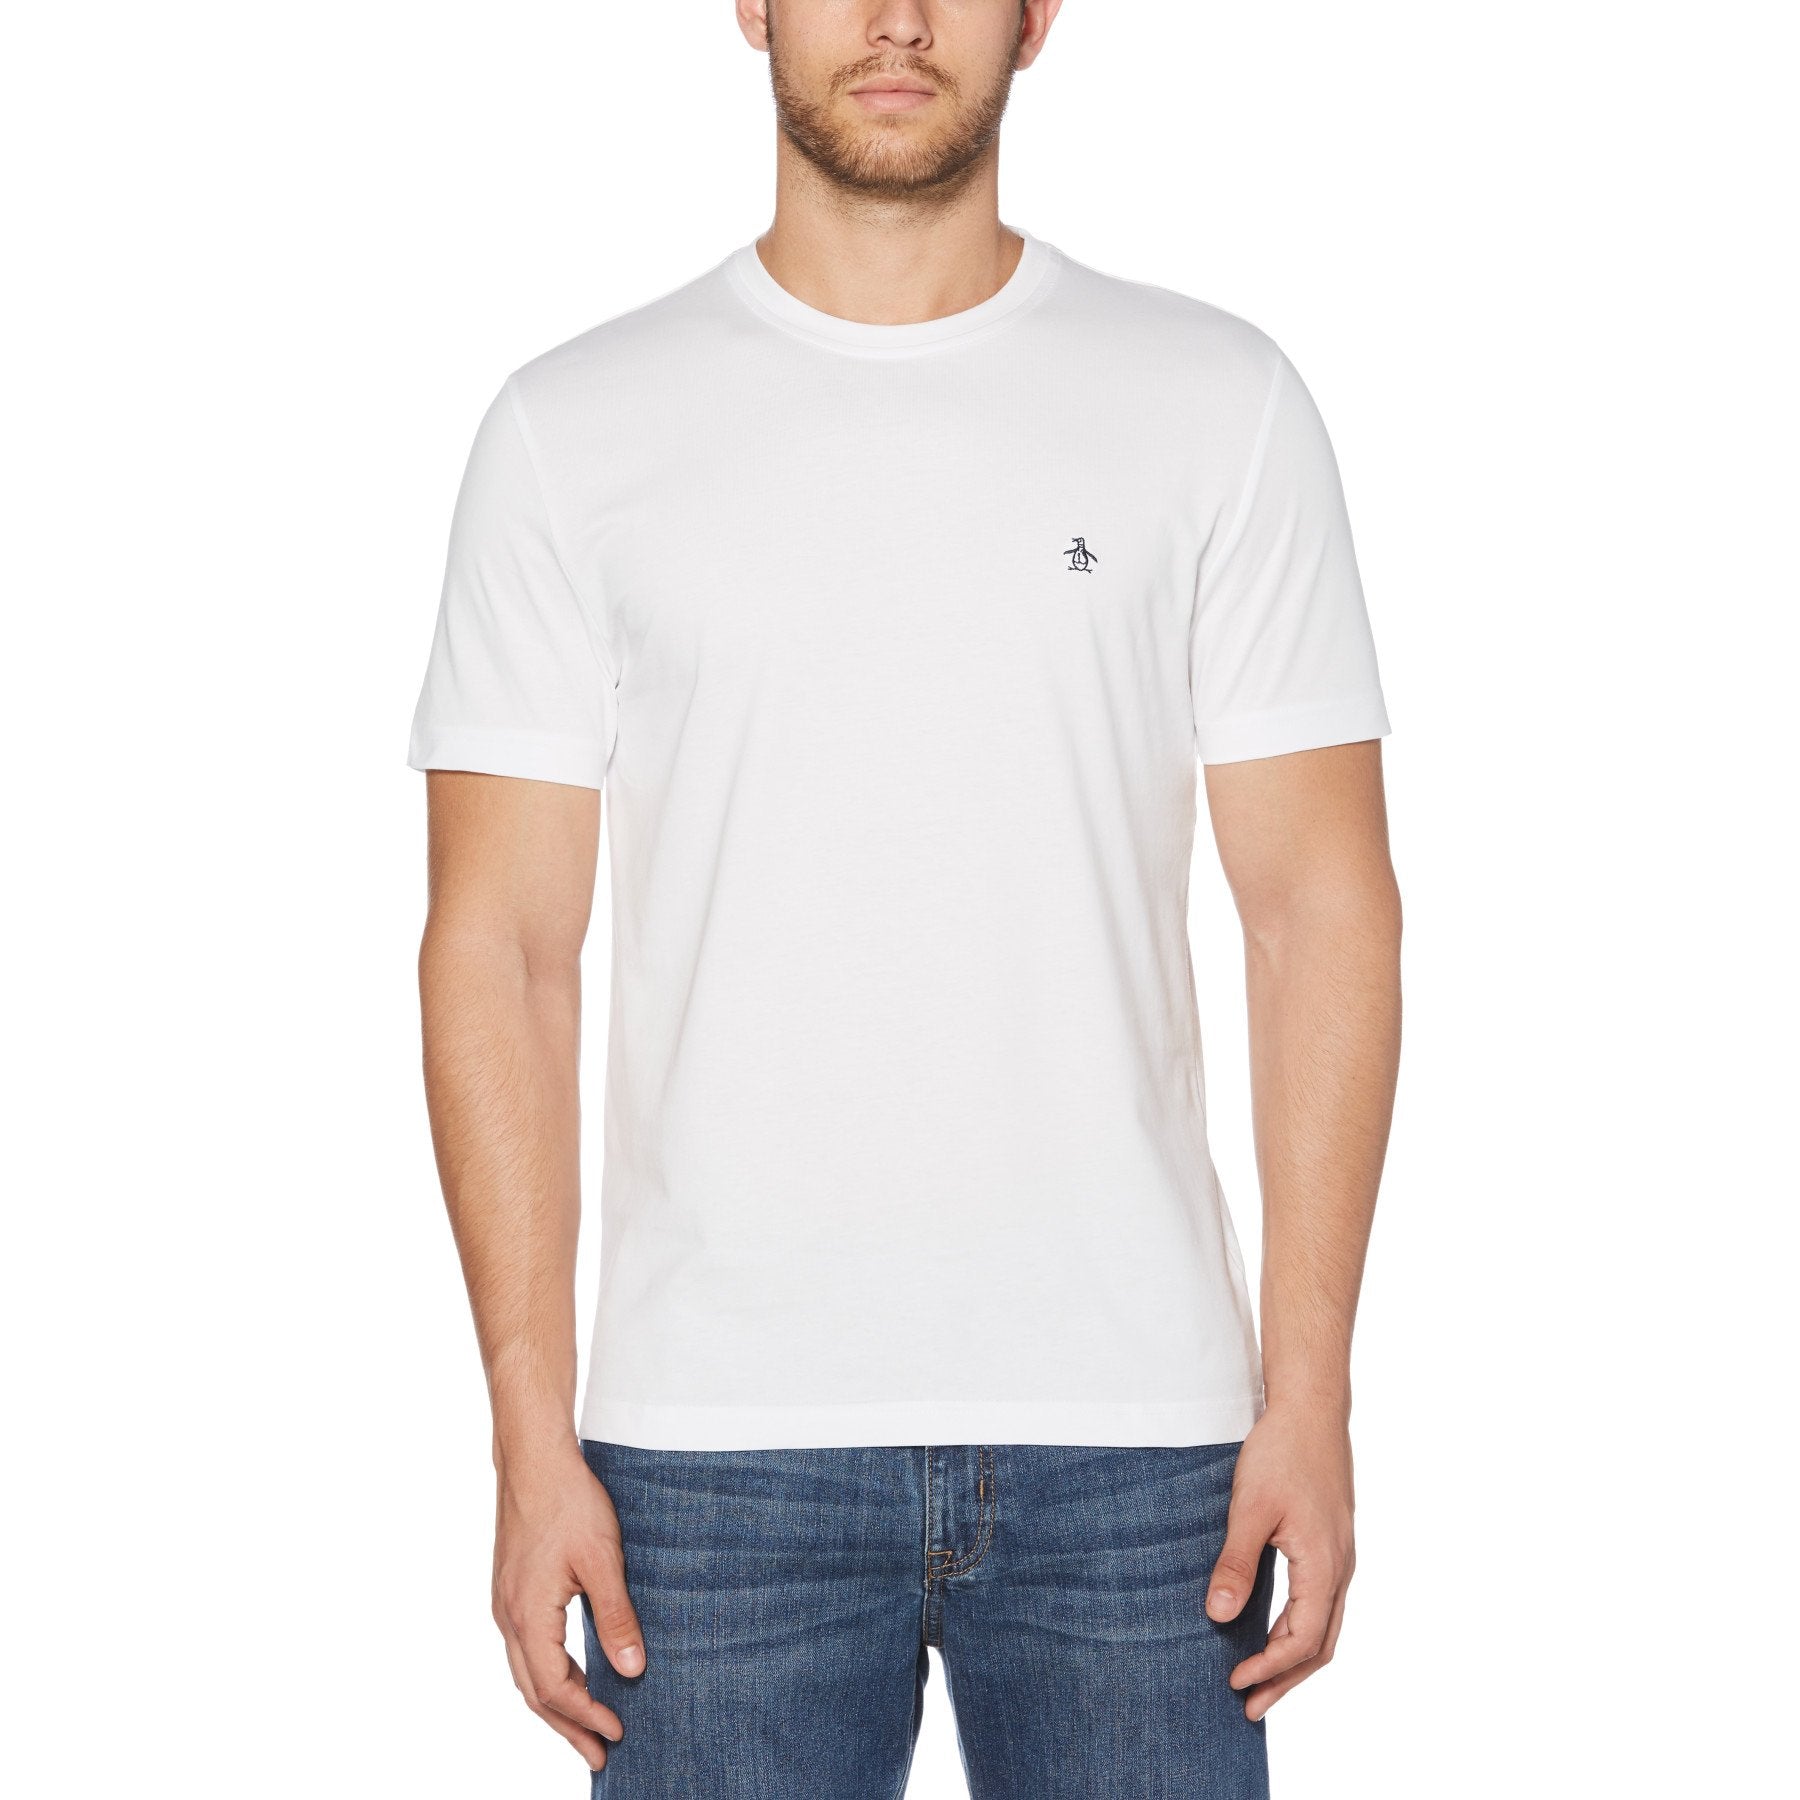 View Pin Point Embroidered Logo Organic Cotton TShirt In Bright White information